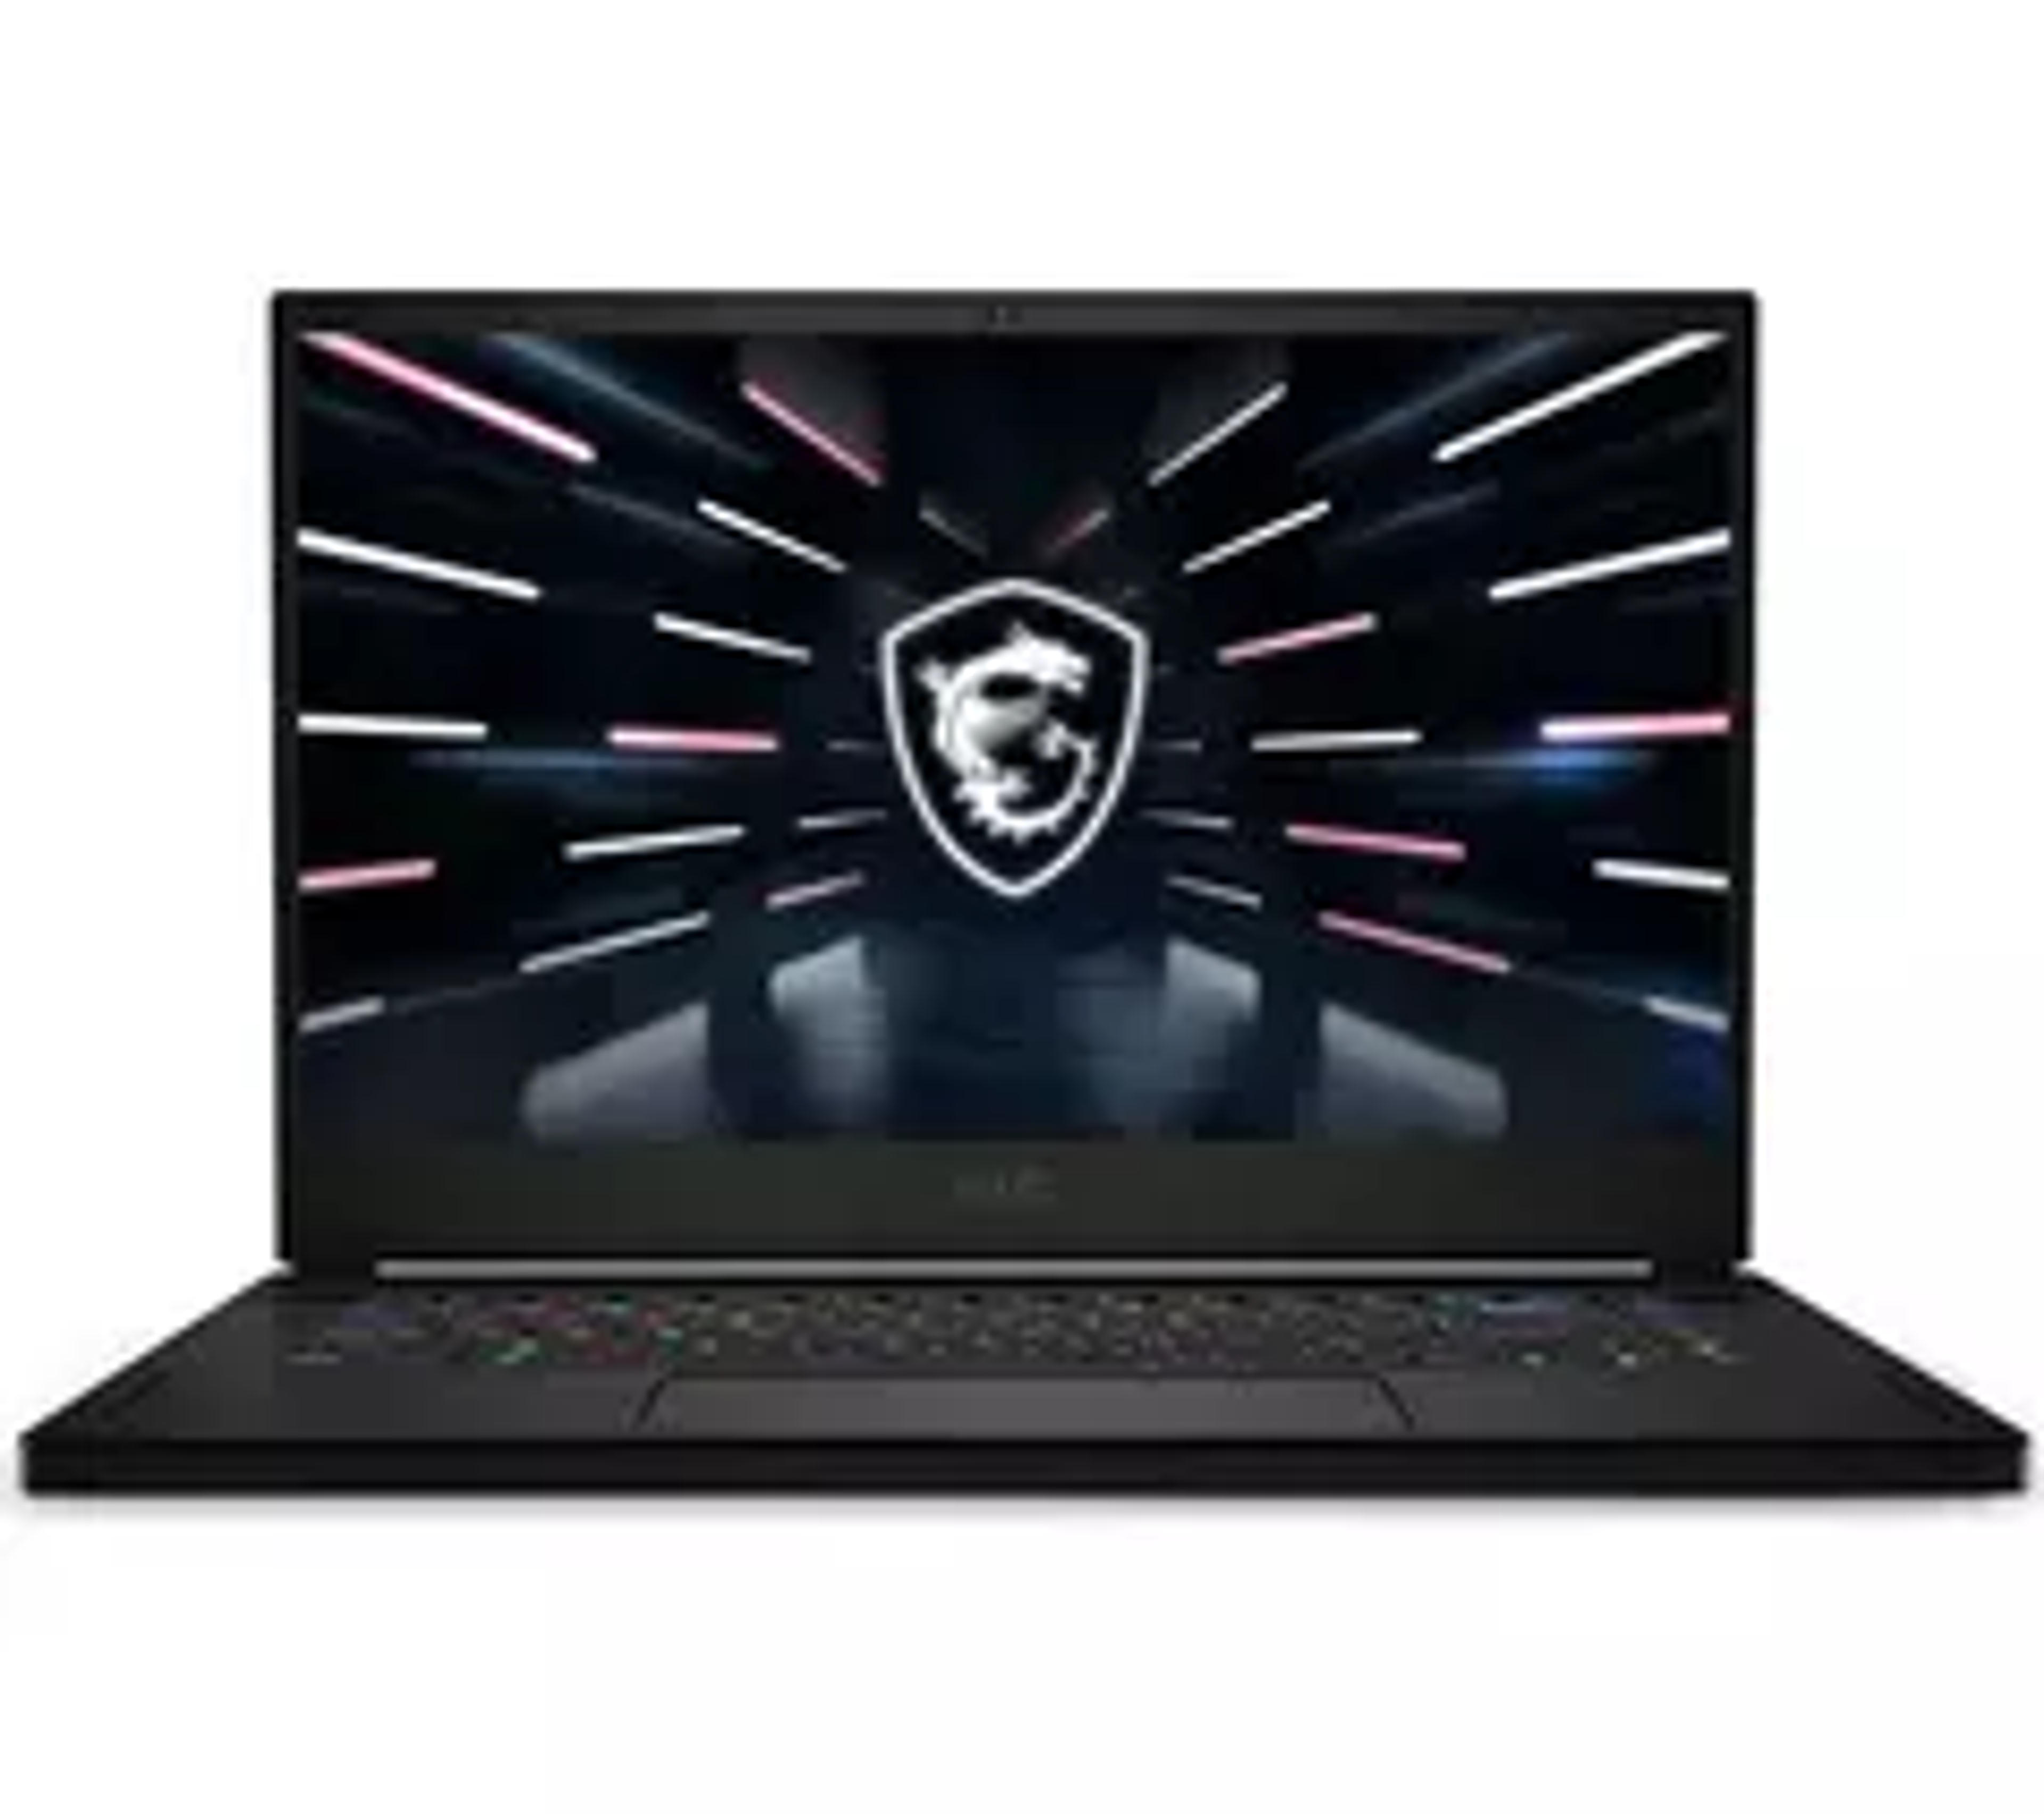 Buy MSI GS66 Stealth 15.6" Gaming Laptop - Intel® Core™ i7, RTX 3070 Ti, 1 TB SSD | Currys